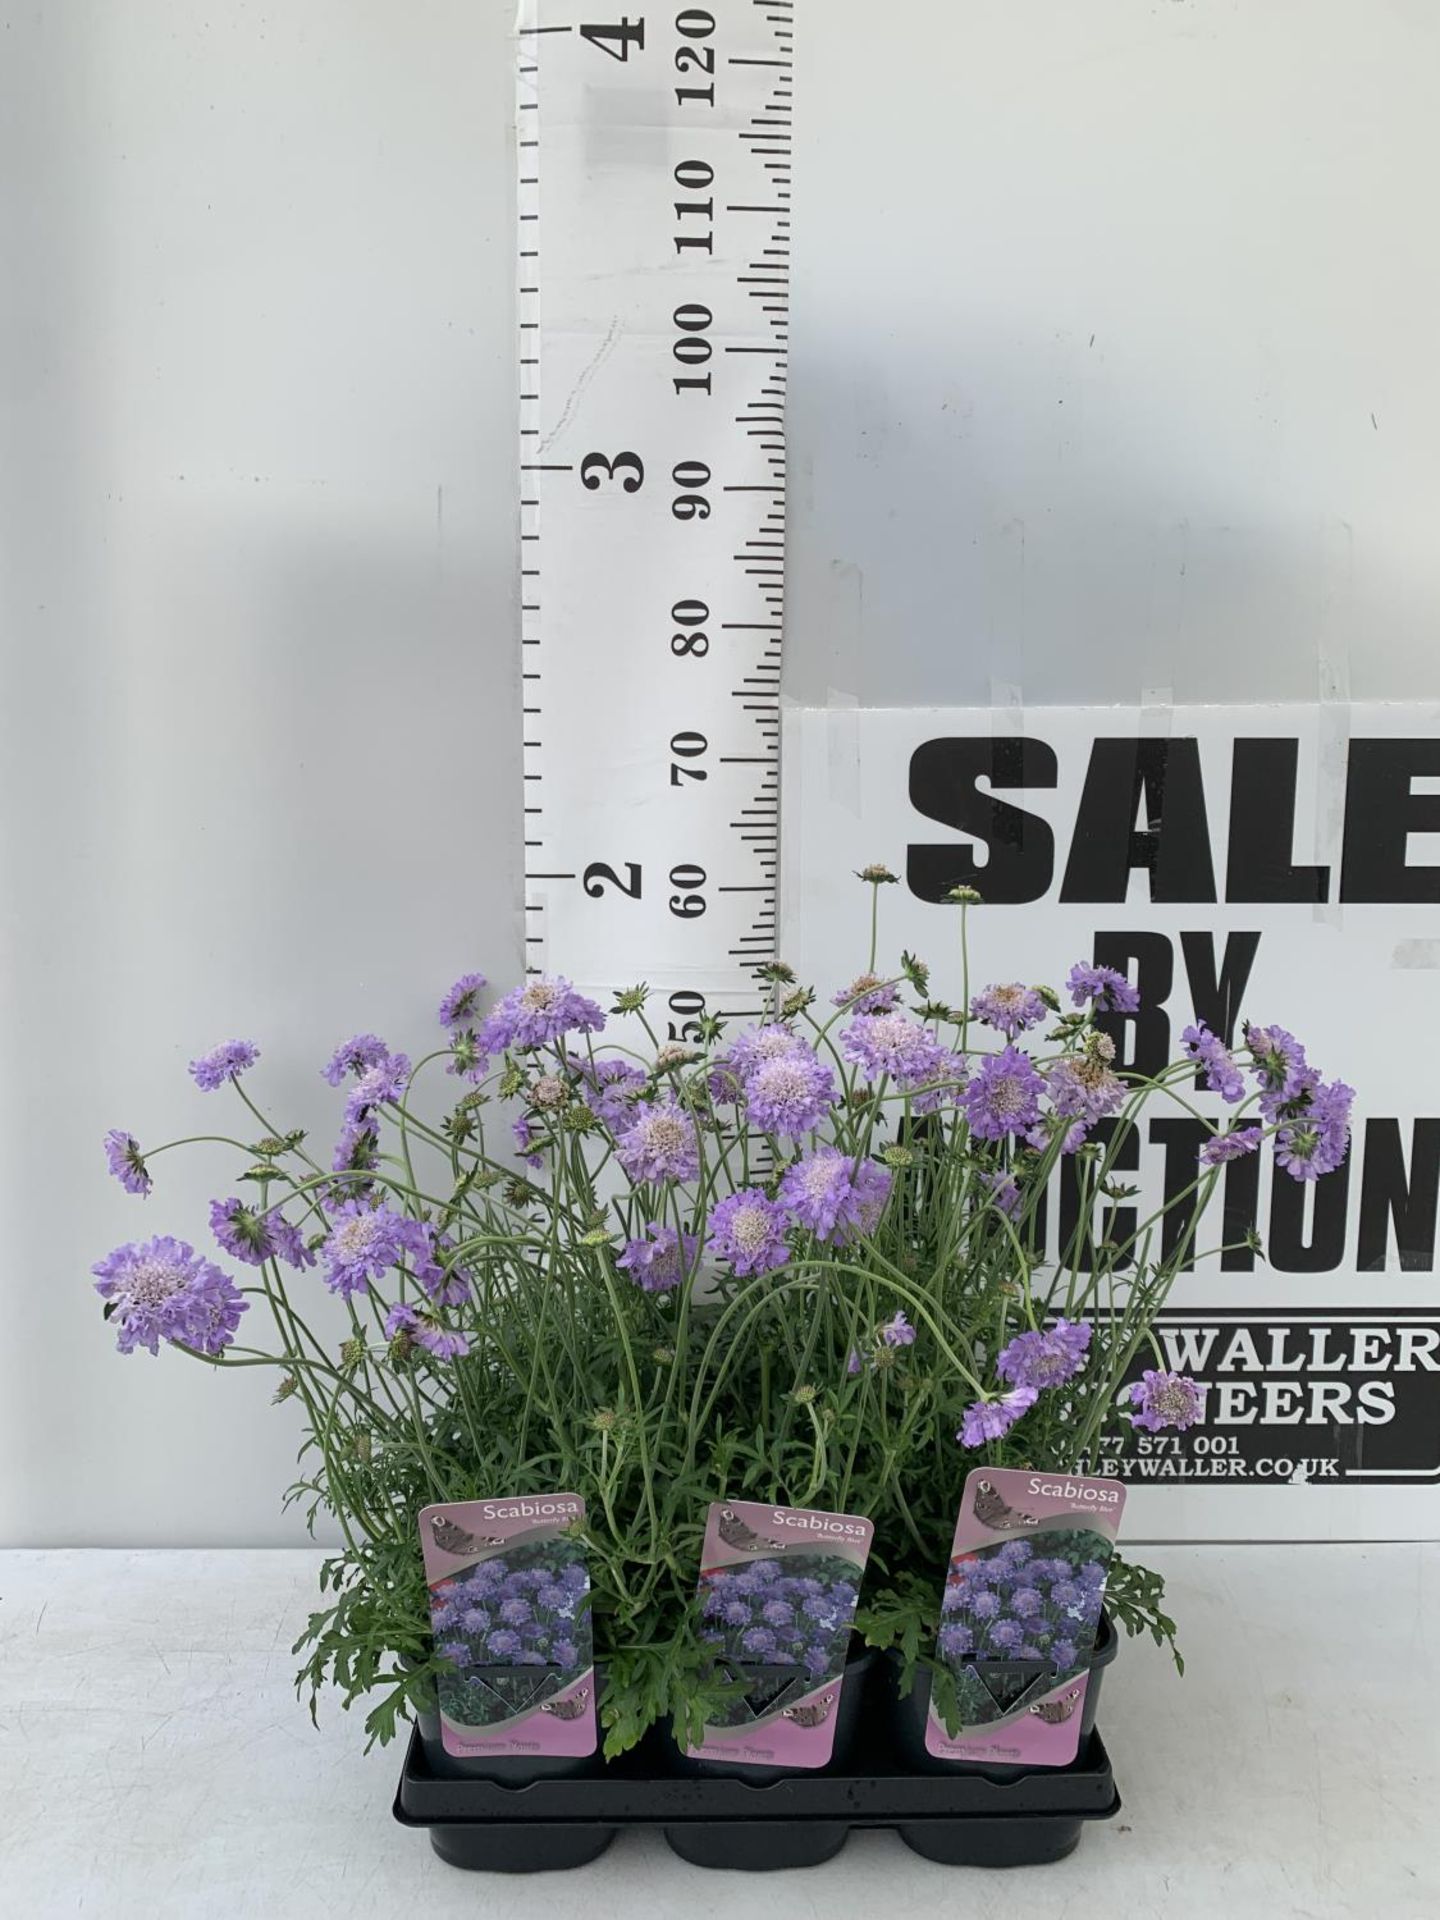 SIX SCABIOSA BUTTERFLY BLUE IN 2 LTR POTS 50-60CM TALL TO BE SOLD FOR THE SIX PLUS VAT